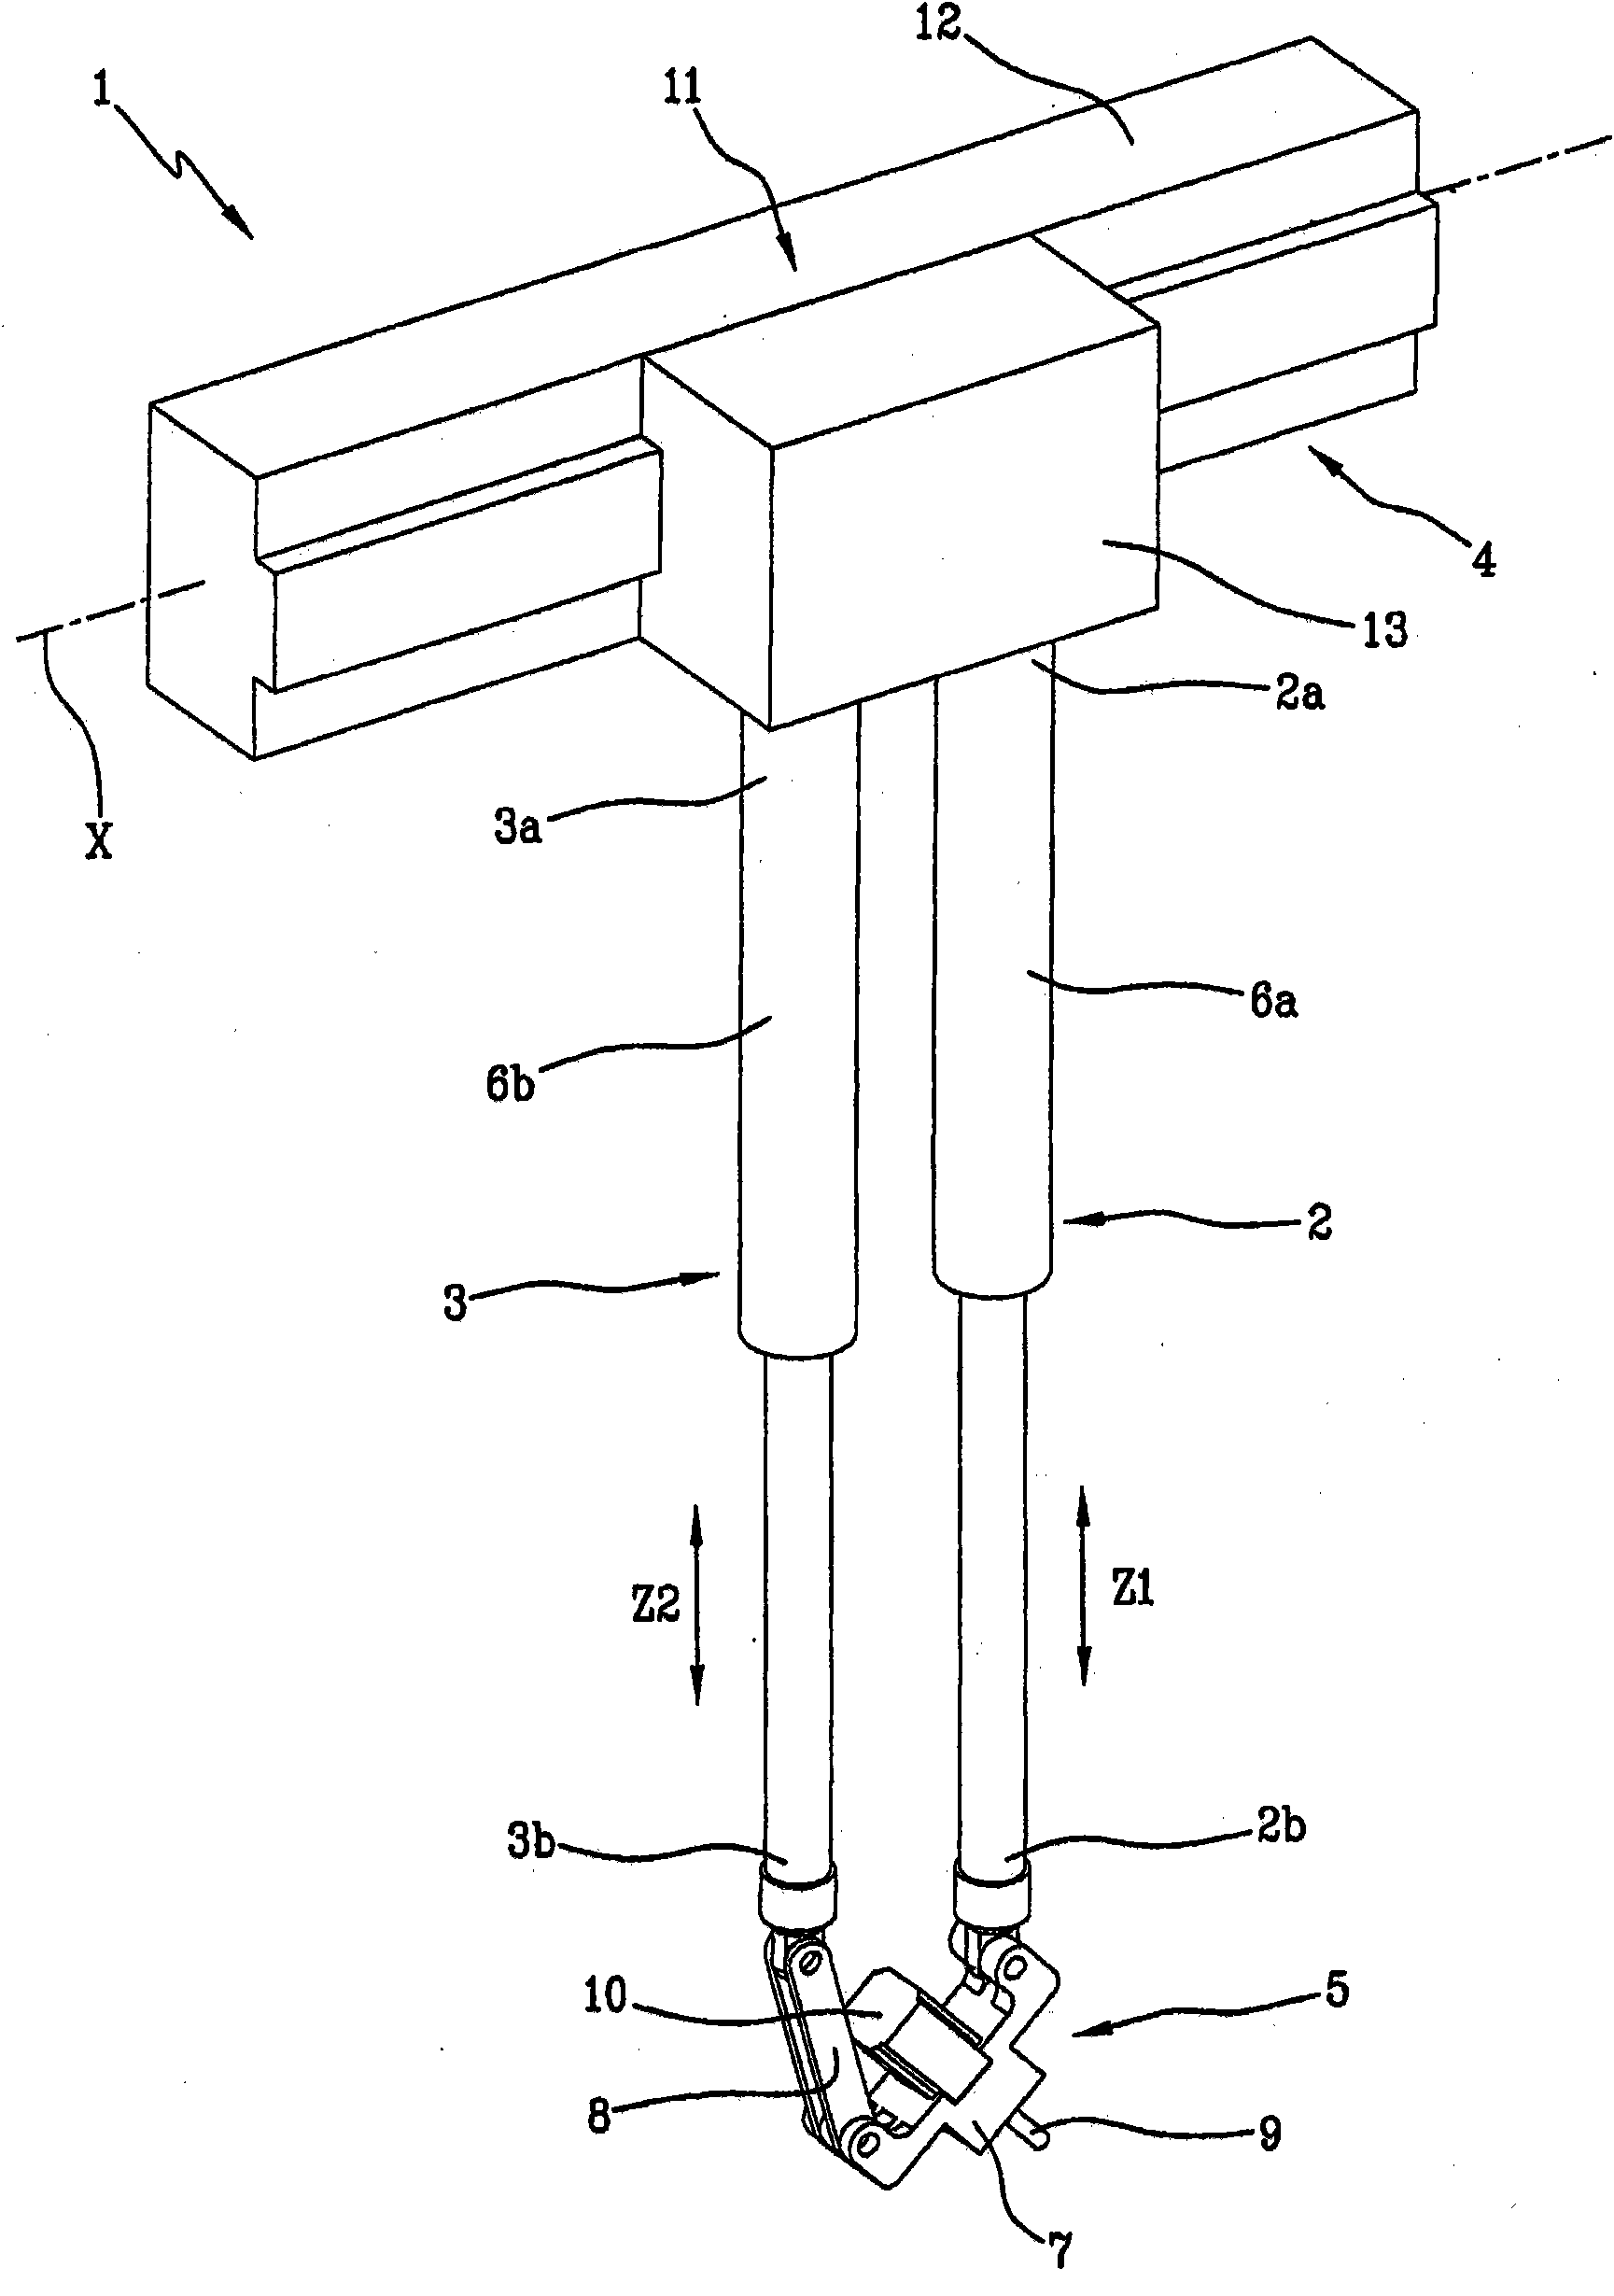 A device for handling and/or performing work operations on objects